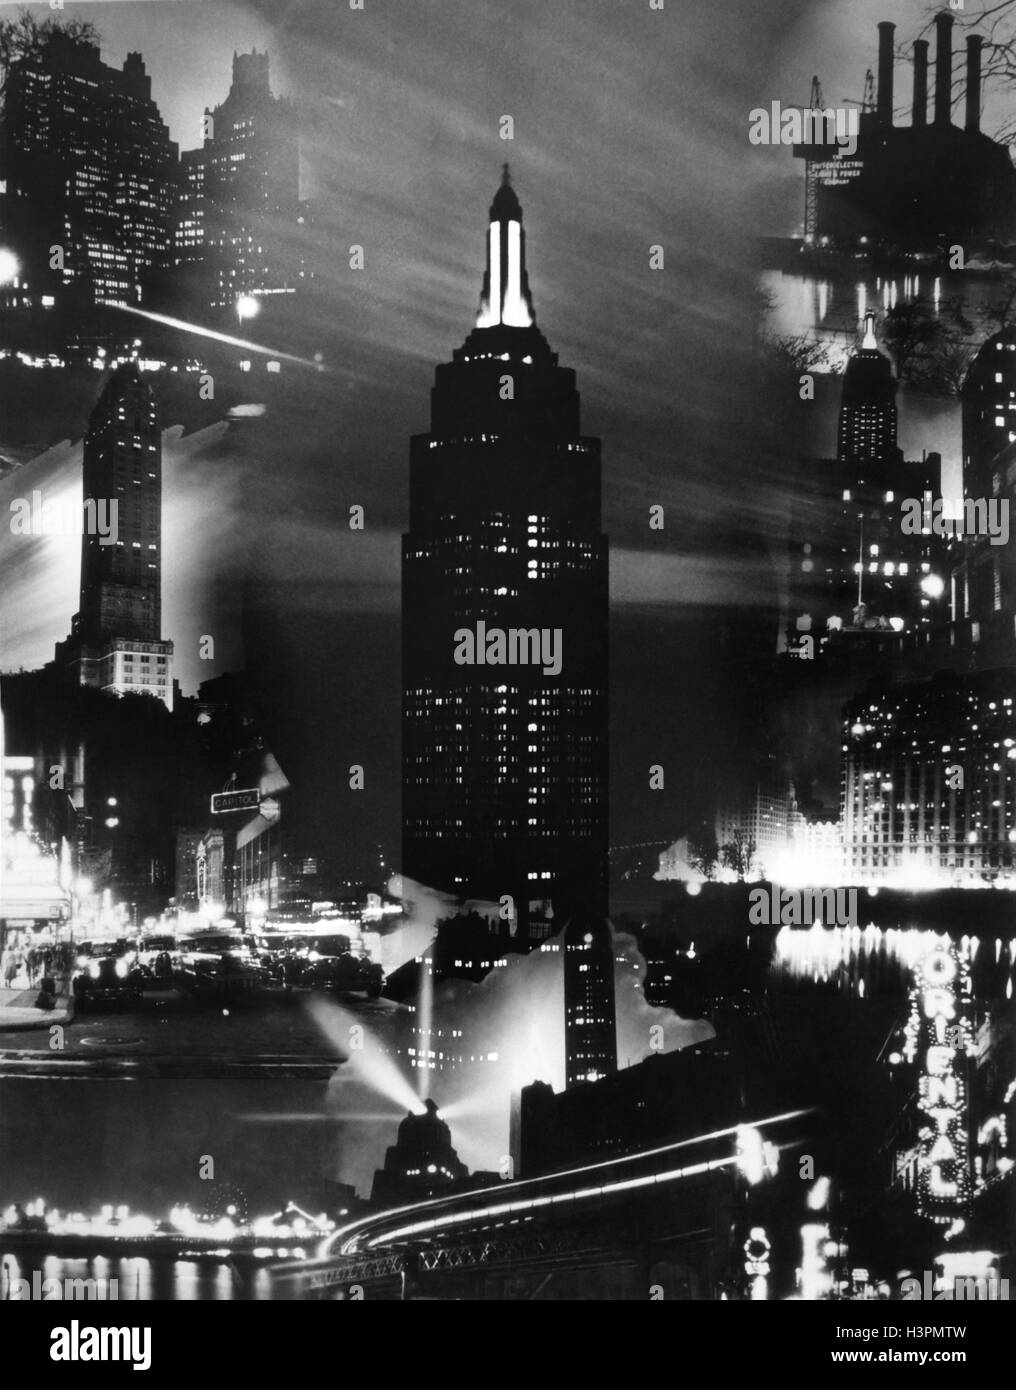 1930s MONTAGE OF NEW YORK CITY BUILDINGS AT NIGHT WITH EMPIRE STATE BUILDING IN CENTER Stock Photo